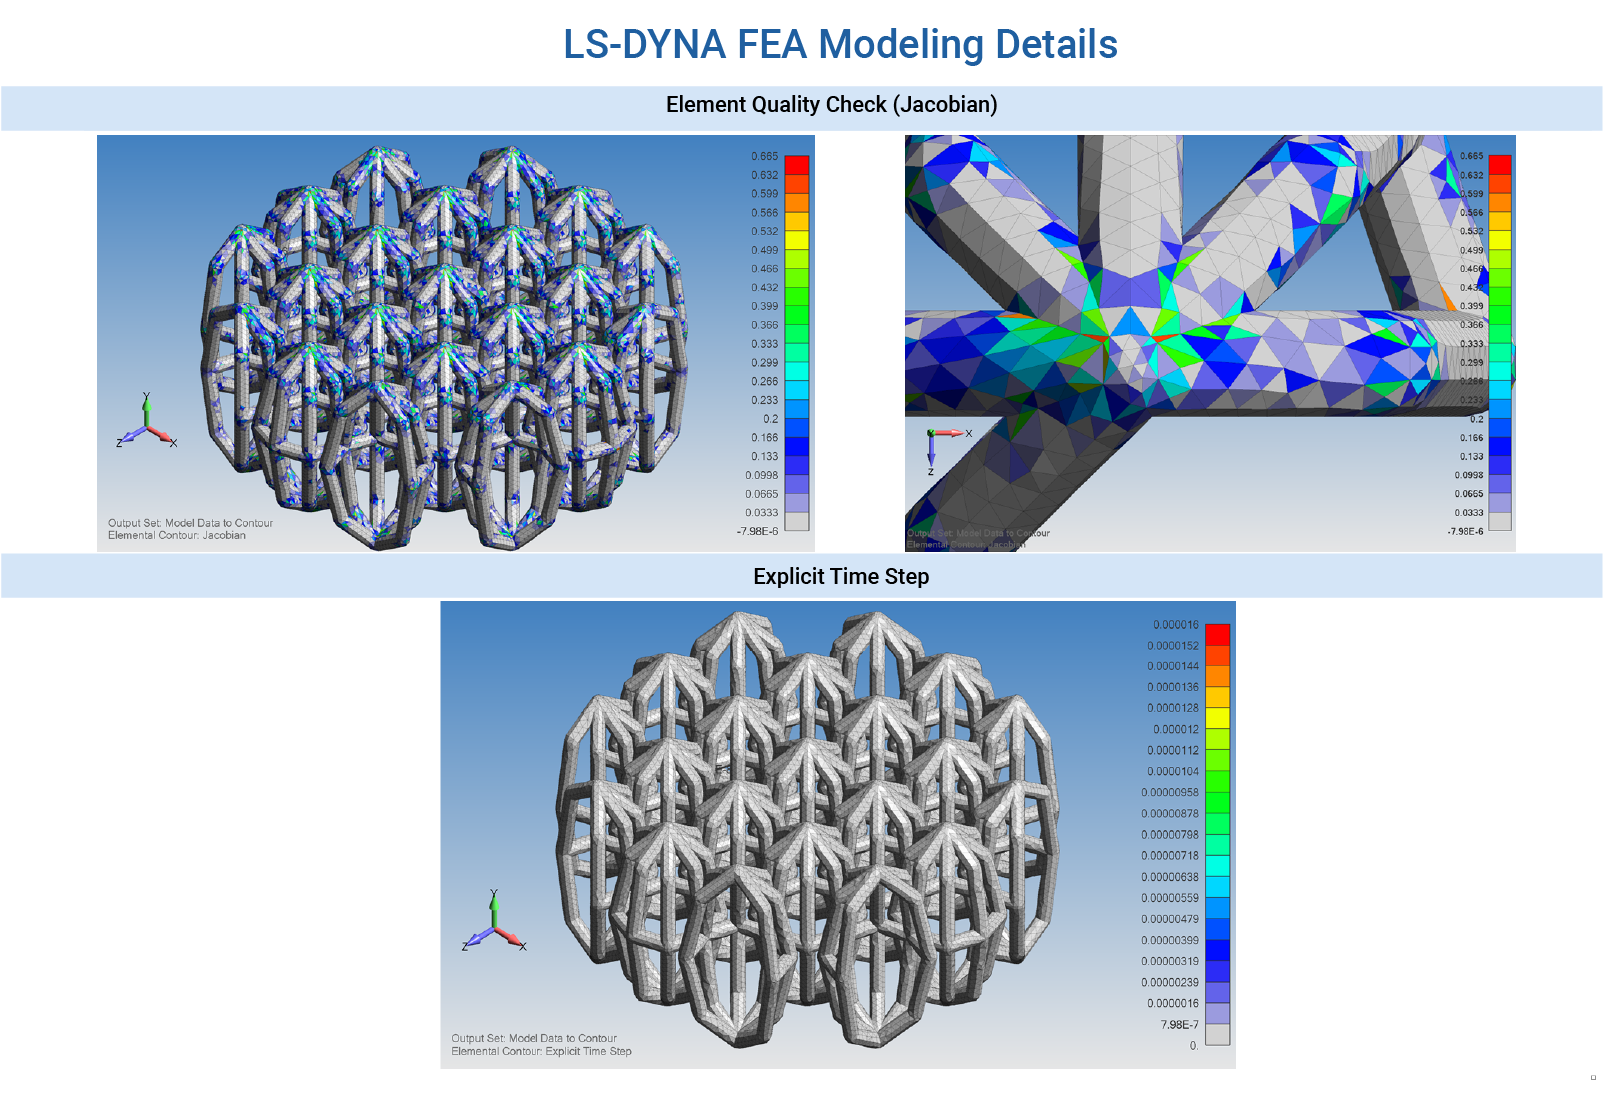 LS-DYNA FEA Modeling Details - All Models Built using FEMAP from Siemens PLM Software - Courtesy of Applied CAx